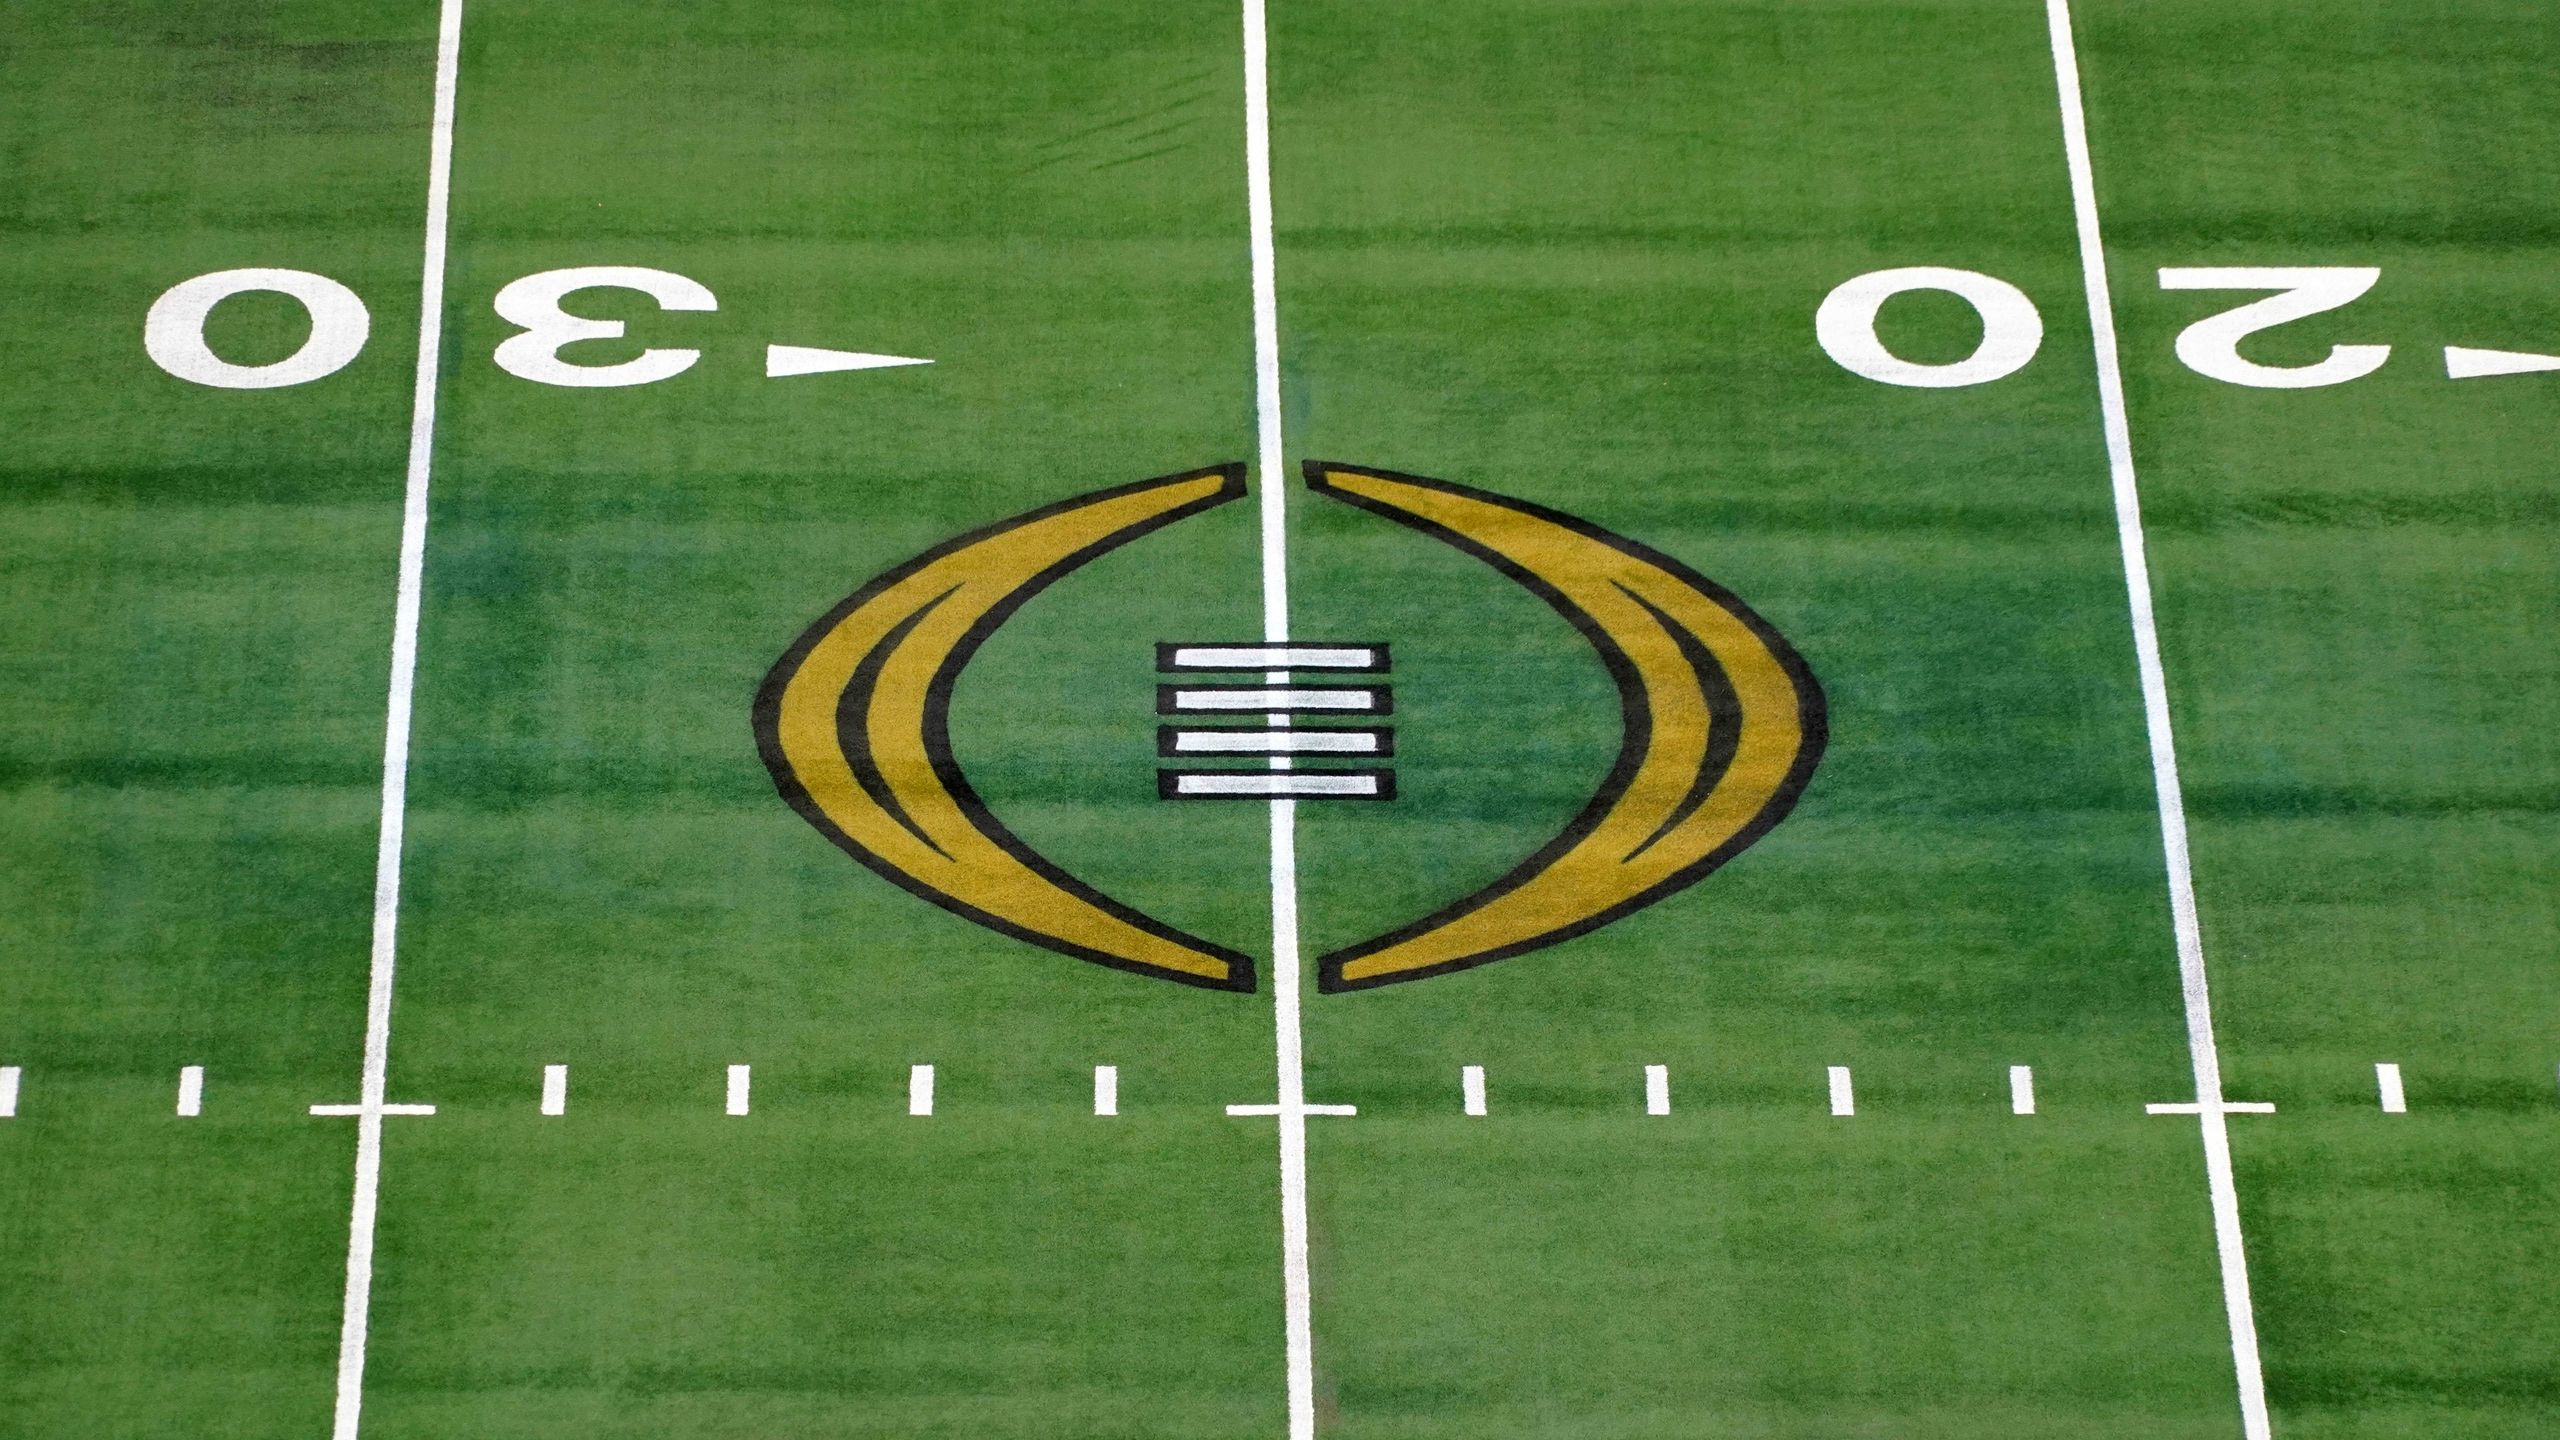 Can You Name These College Football Championship Teams from a Logo